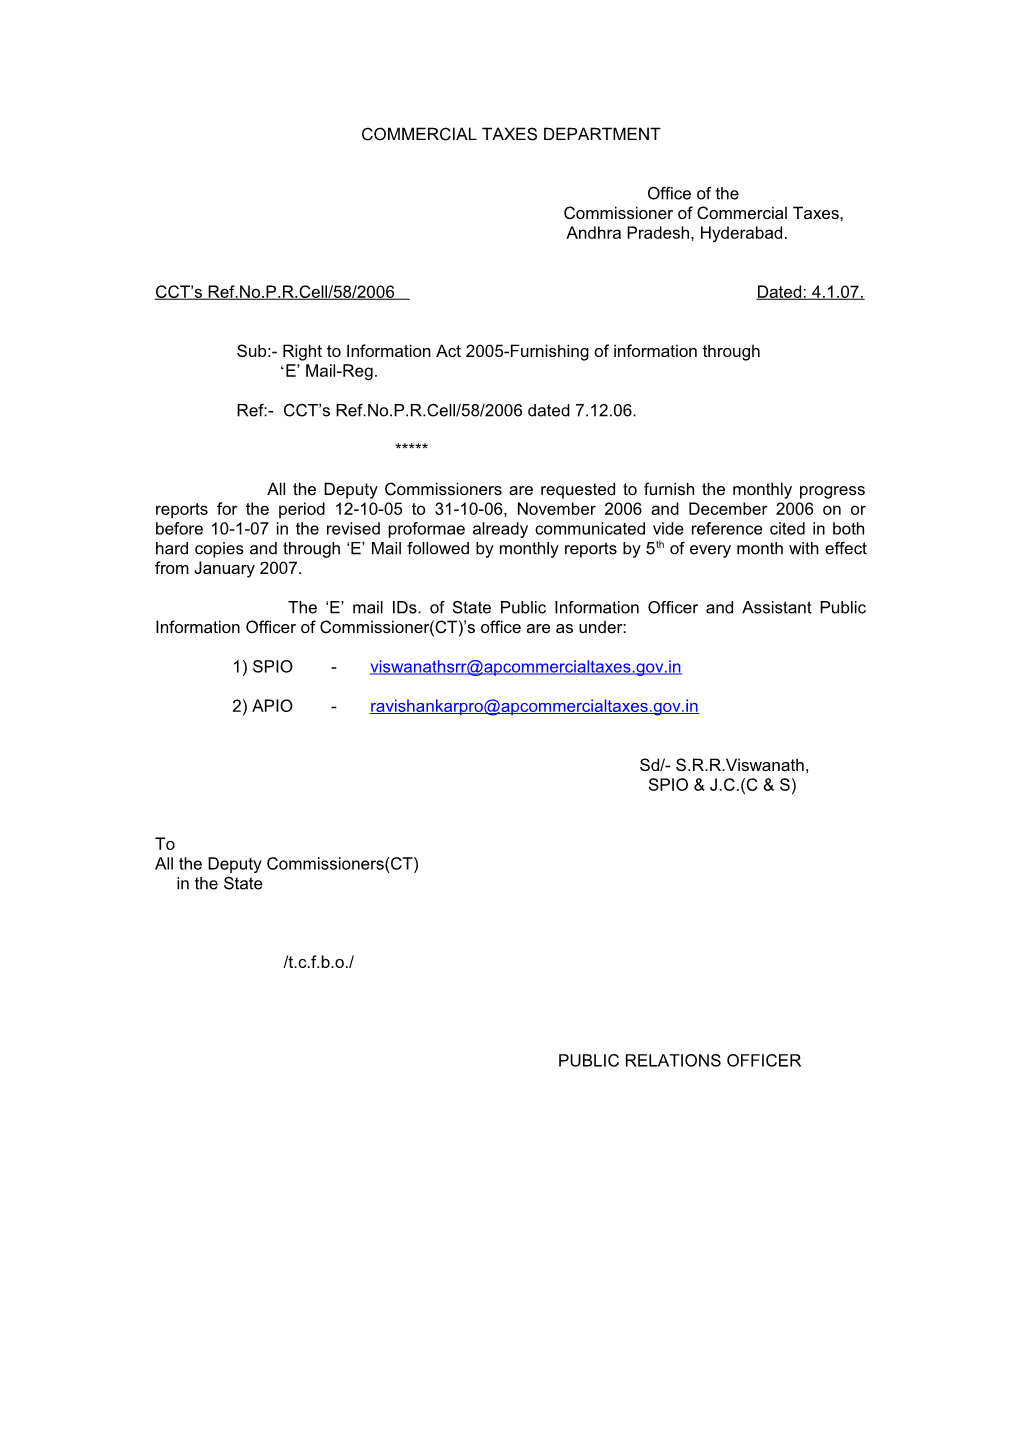 Note to the Assistantcommissioner (General), O/O Cct, Hyderabad